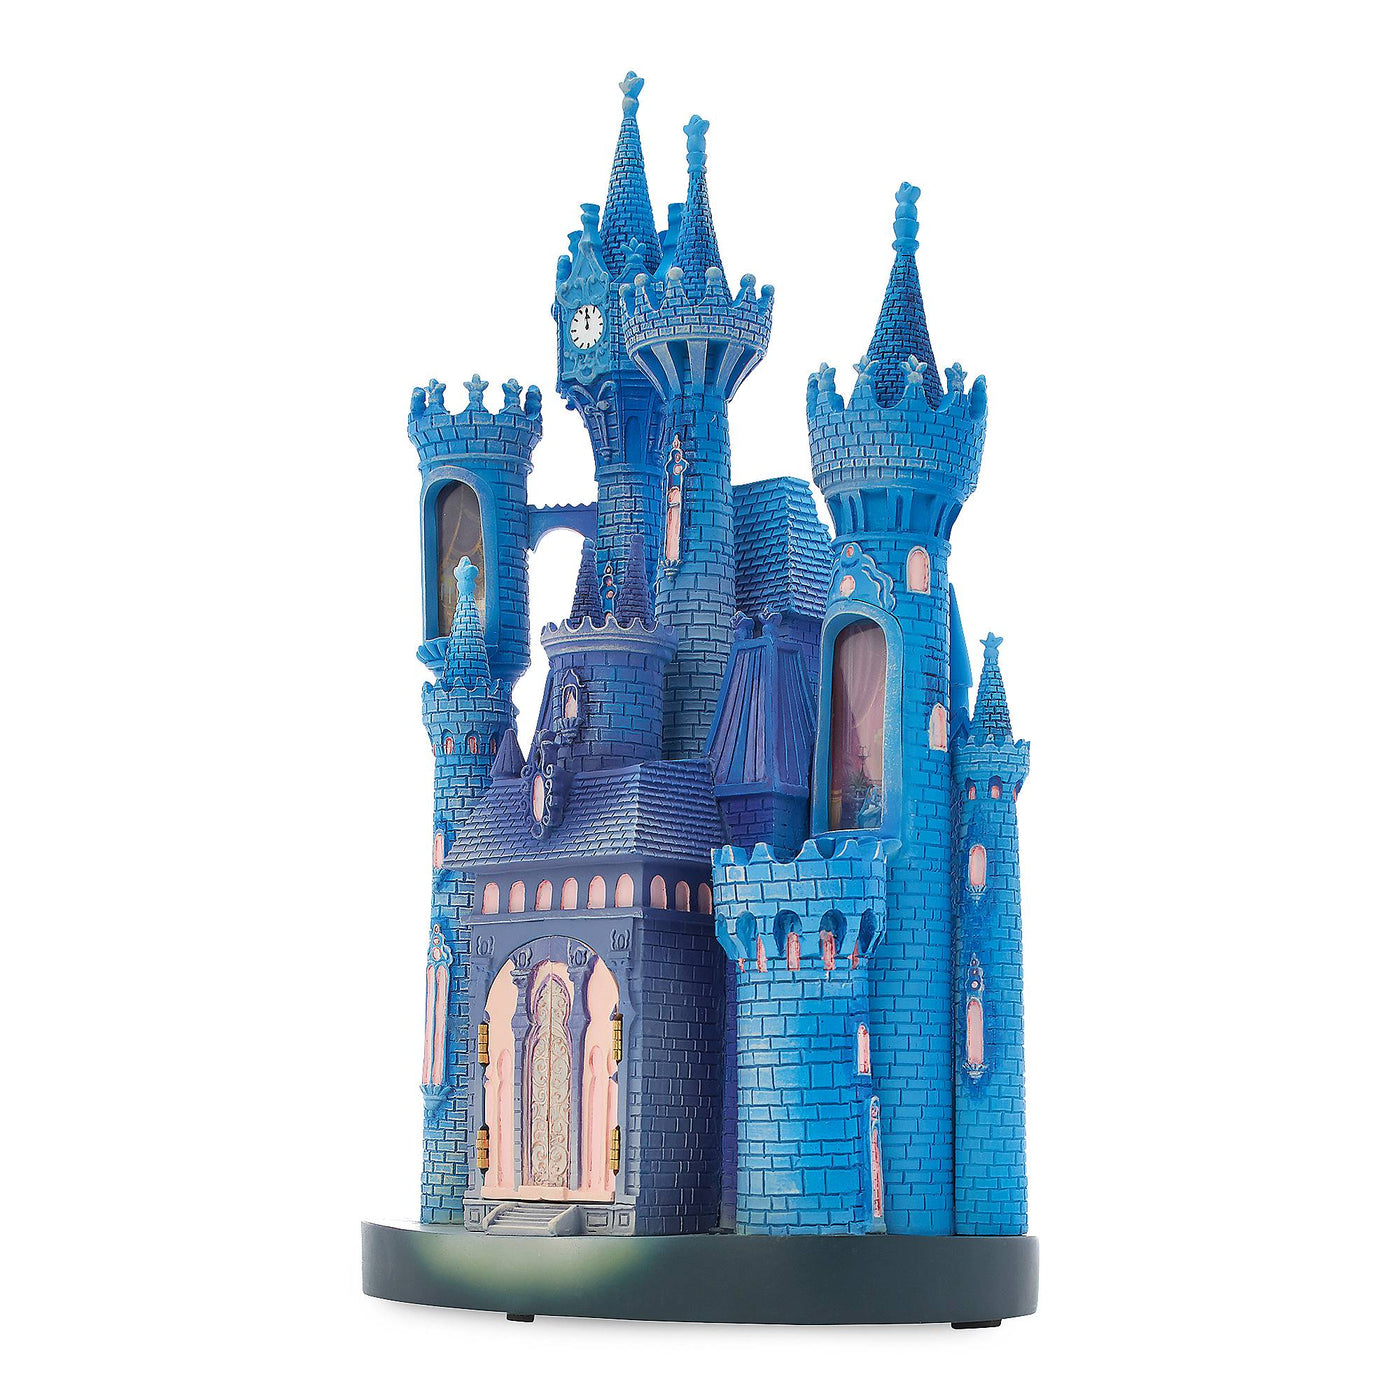 Disney Parks Cinderella Castle Light-Up Figurine Limited Release New with Box